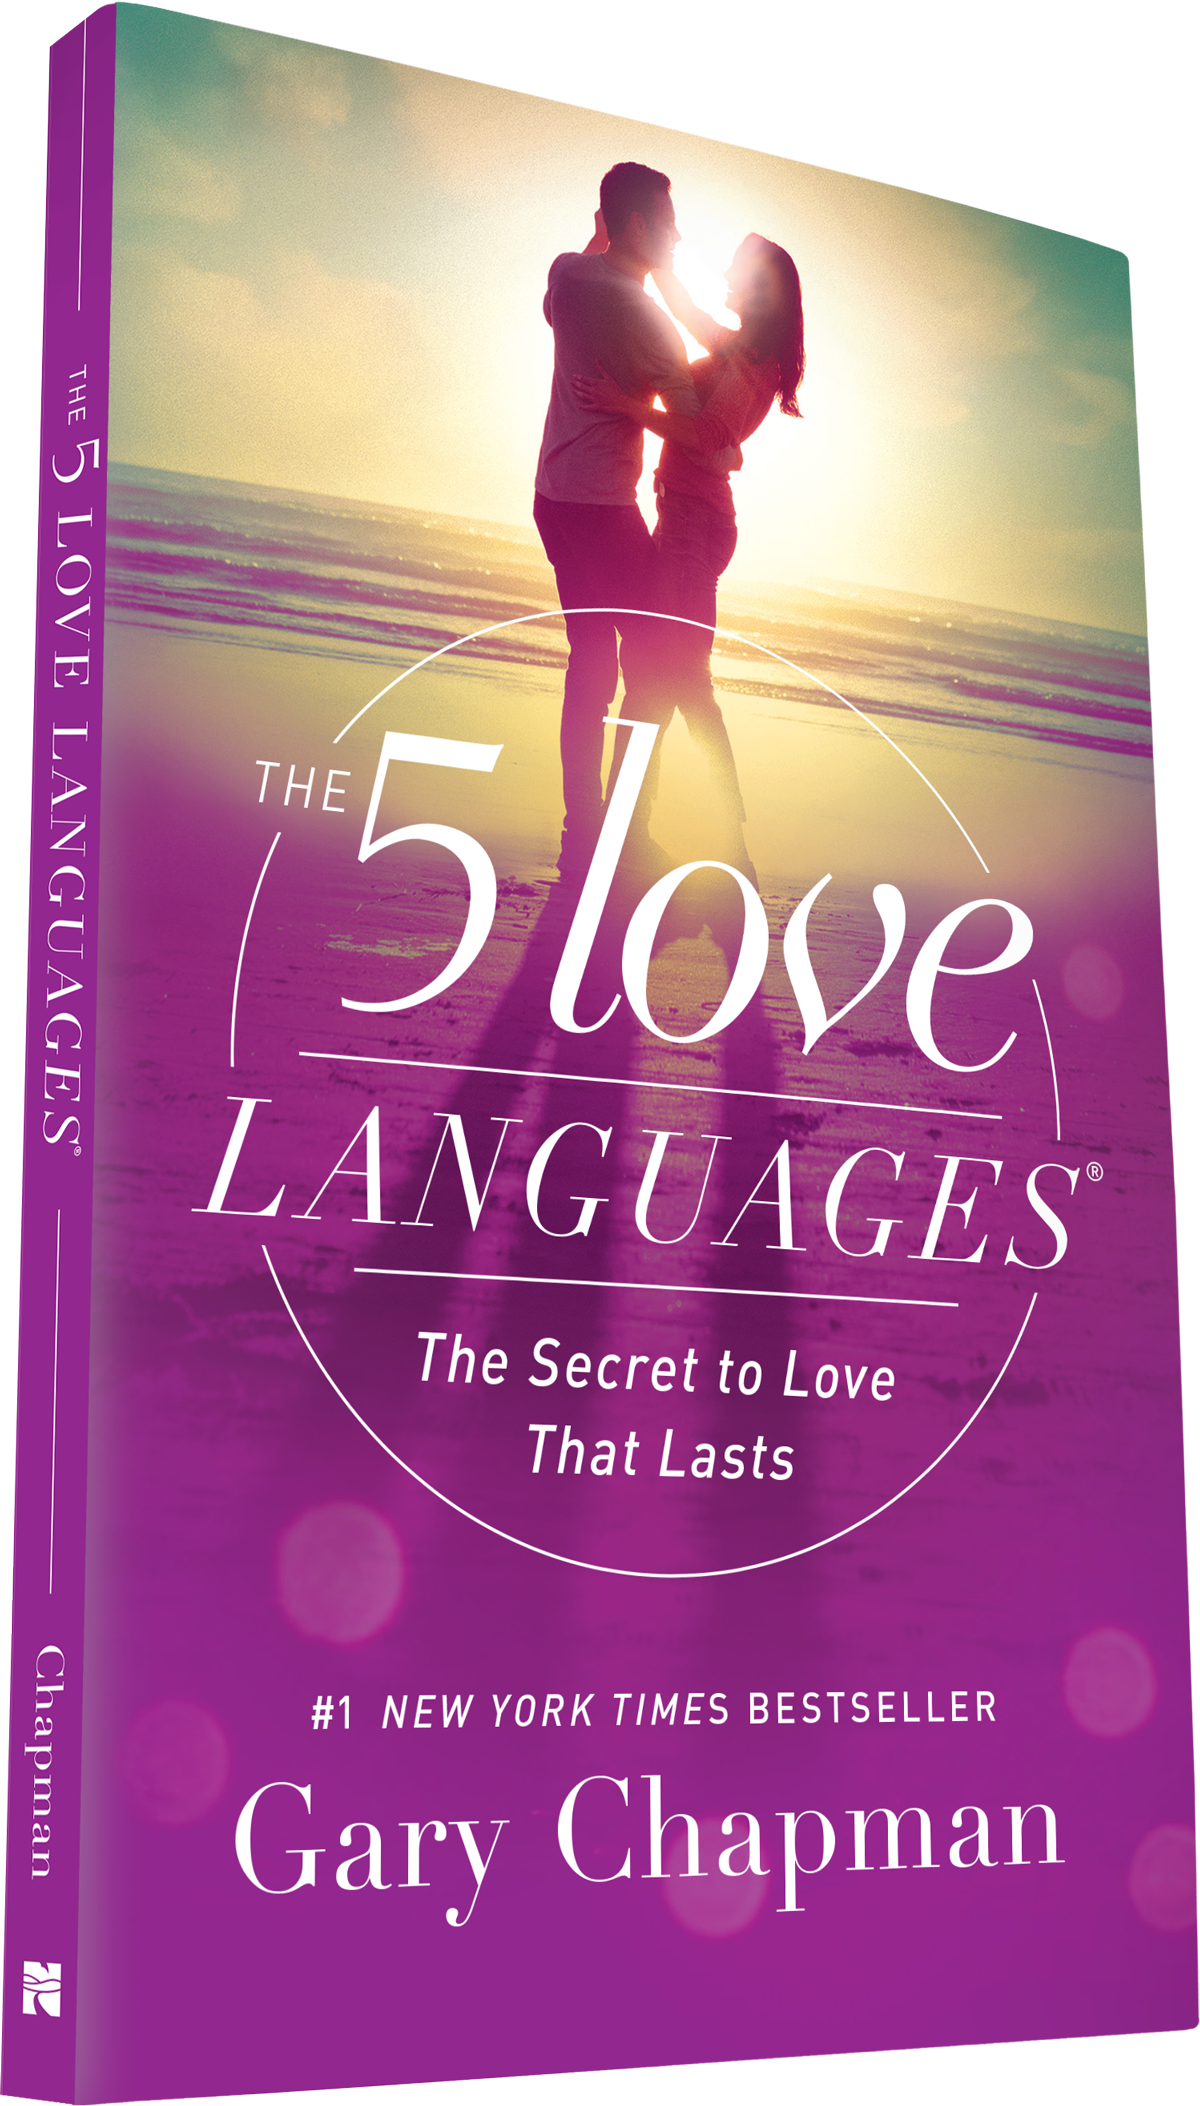 the-5-love-languages-by-gary-chapman-book-review-christian-thought